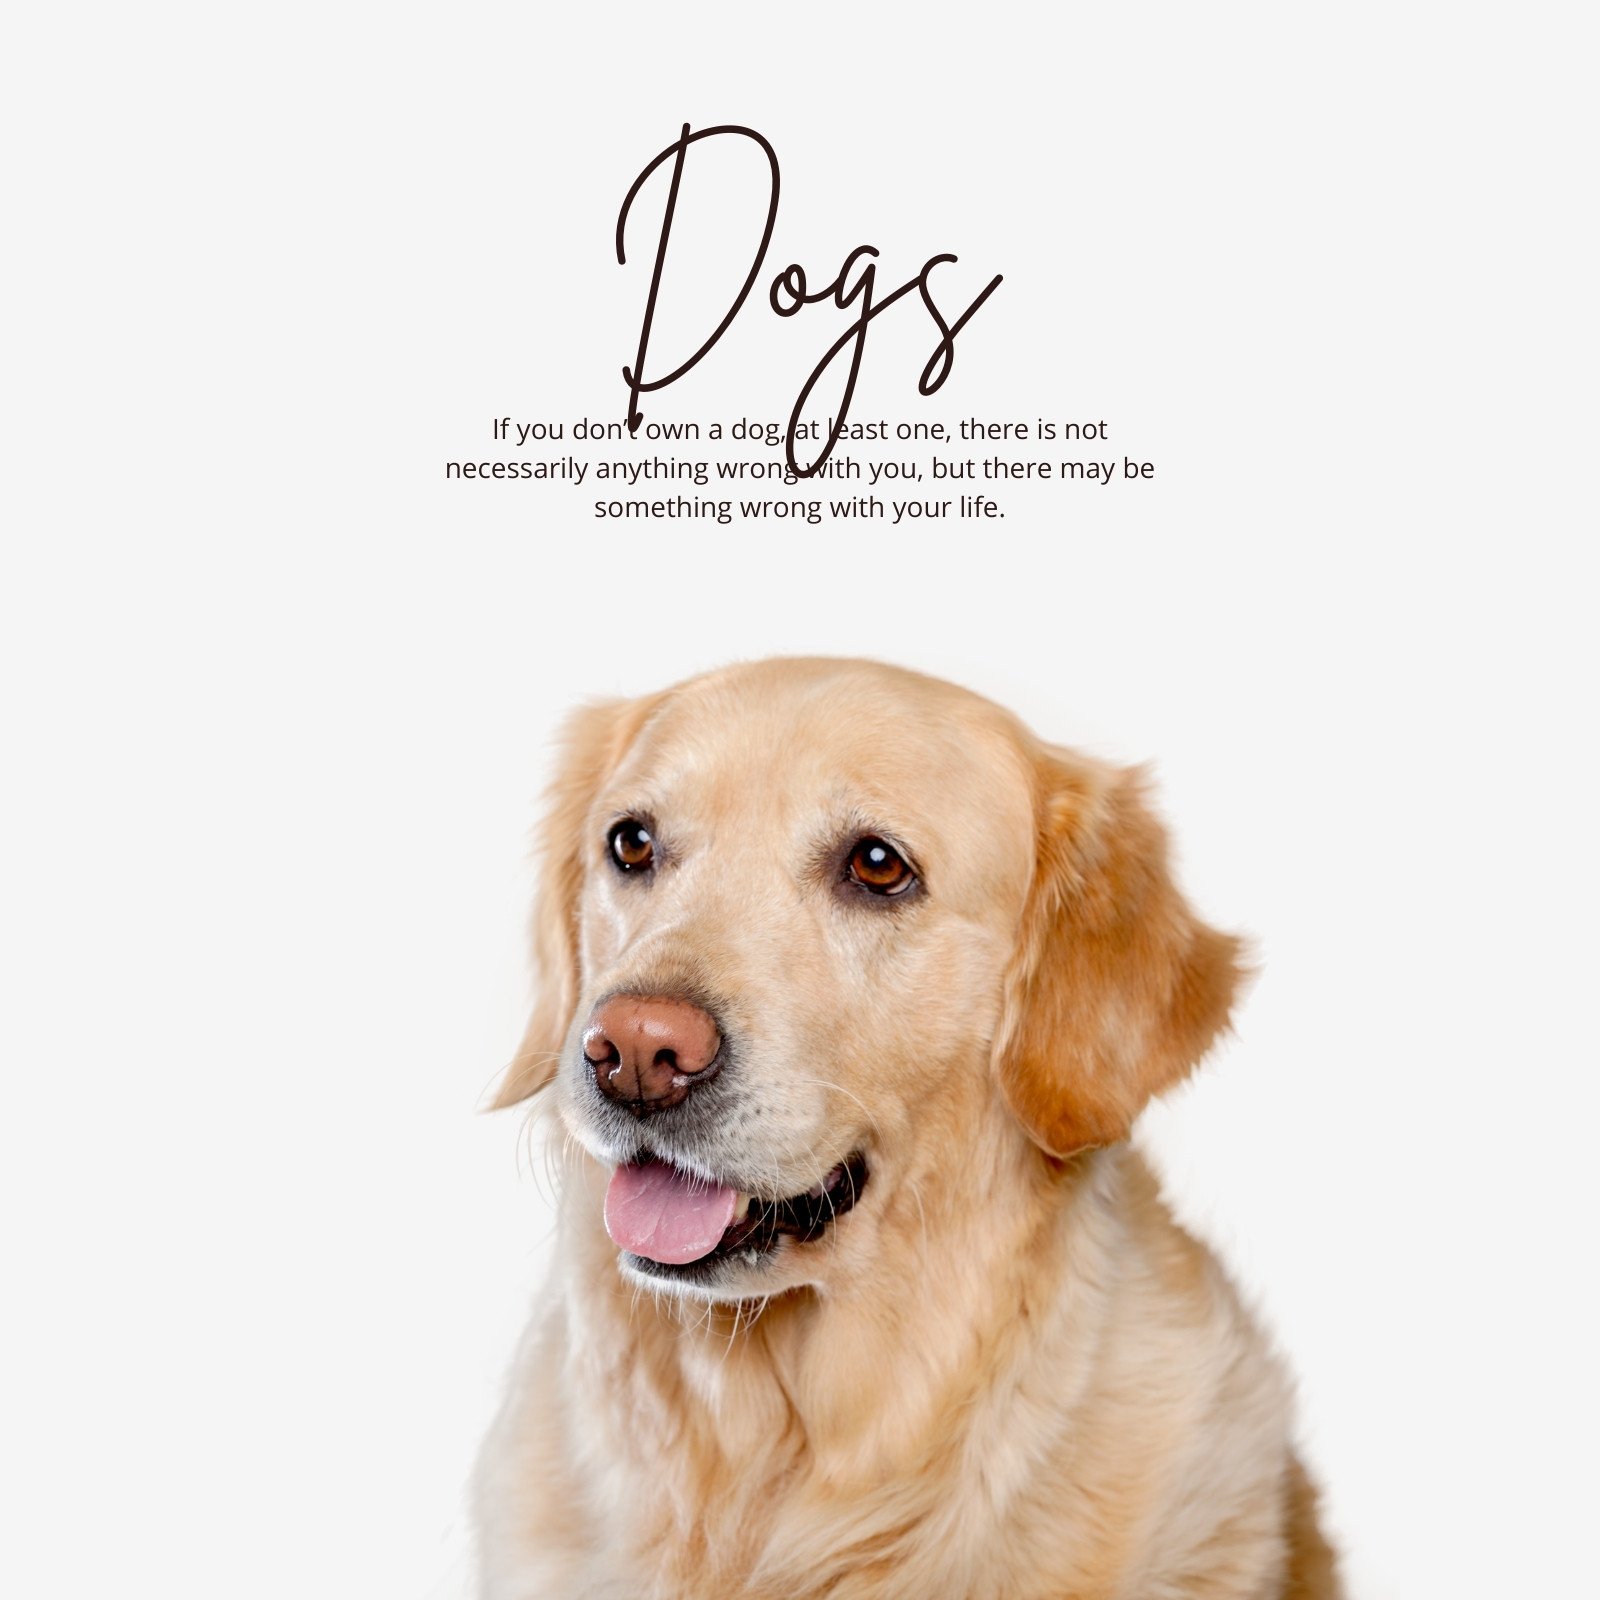 Page 2 - Free and customizable dogs templates